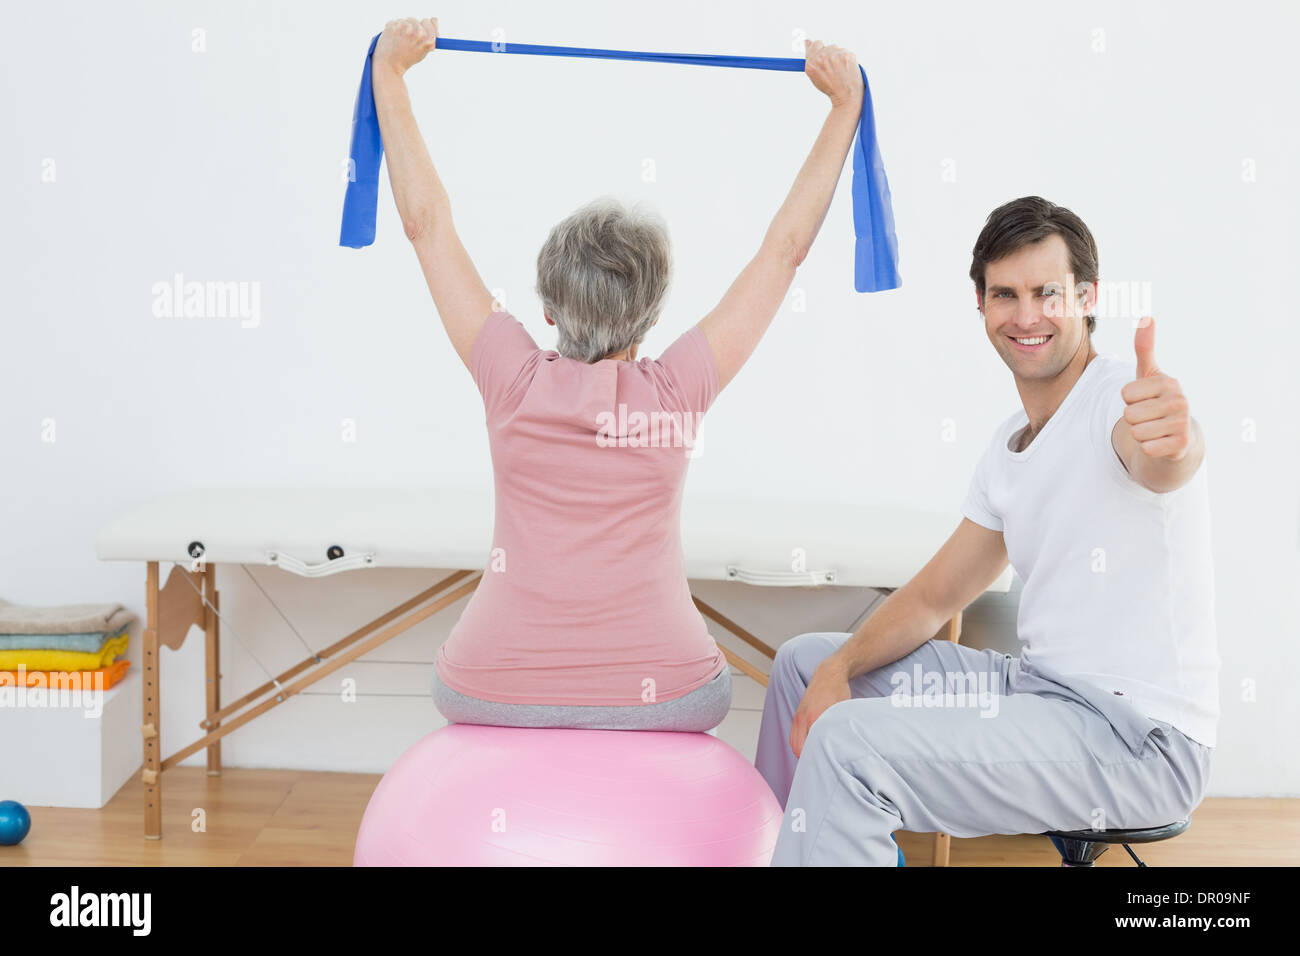 Therapist gesturing thumbs up by woman on yoga ball Stock Photo